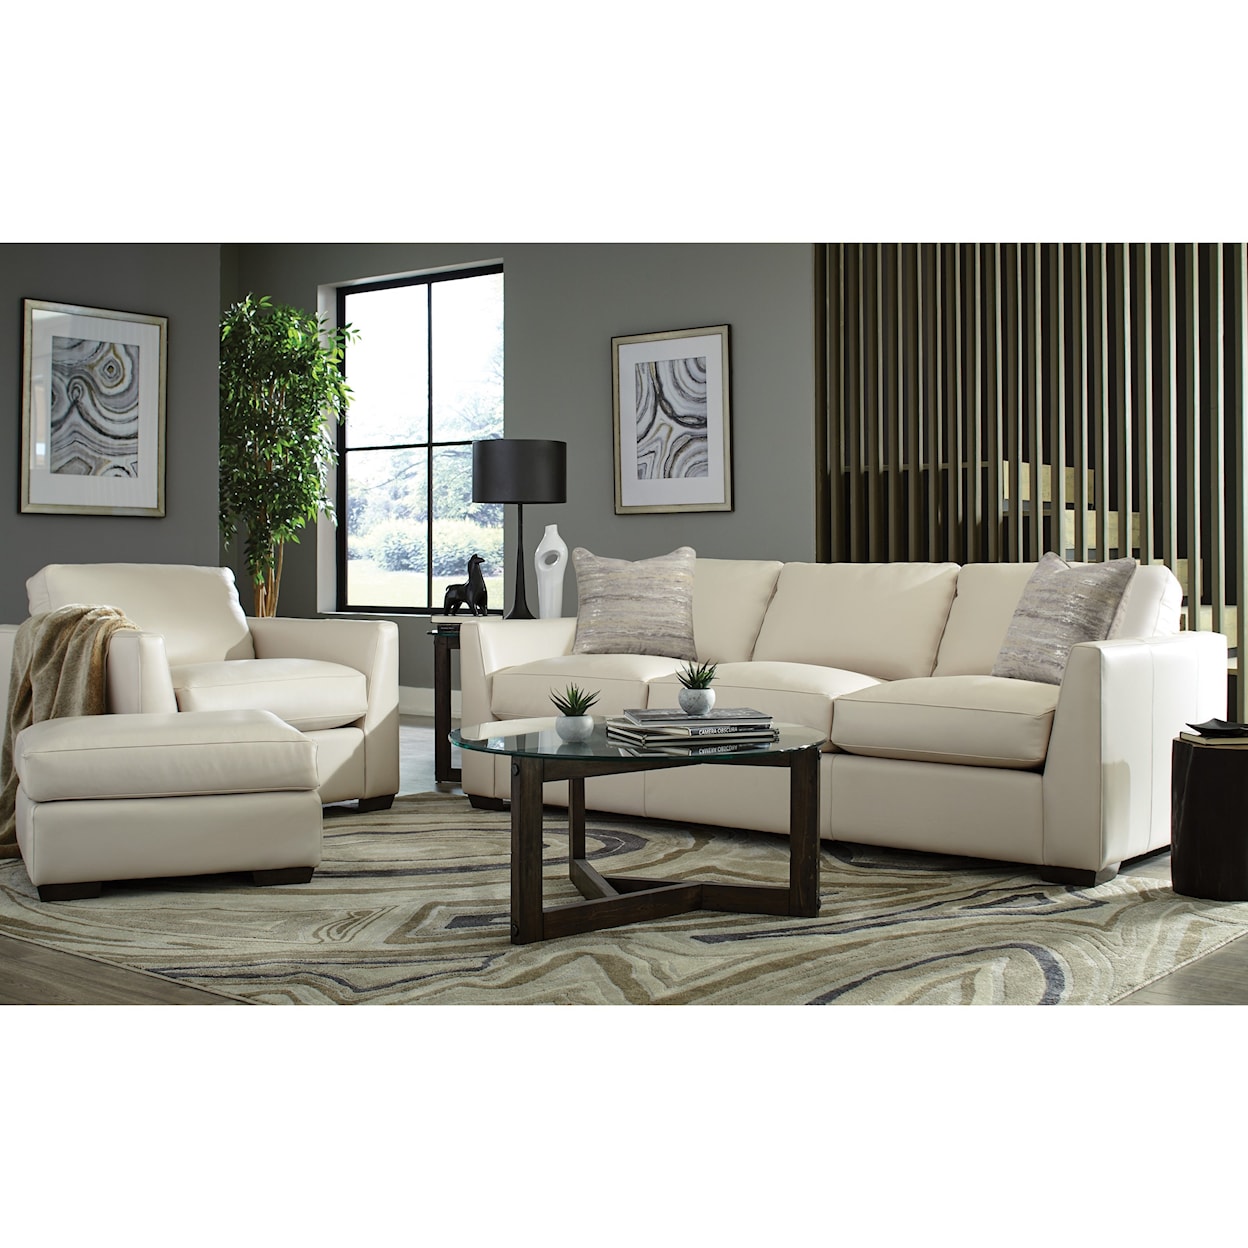 Hickory Craft L783950 Living Room Group